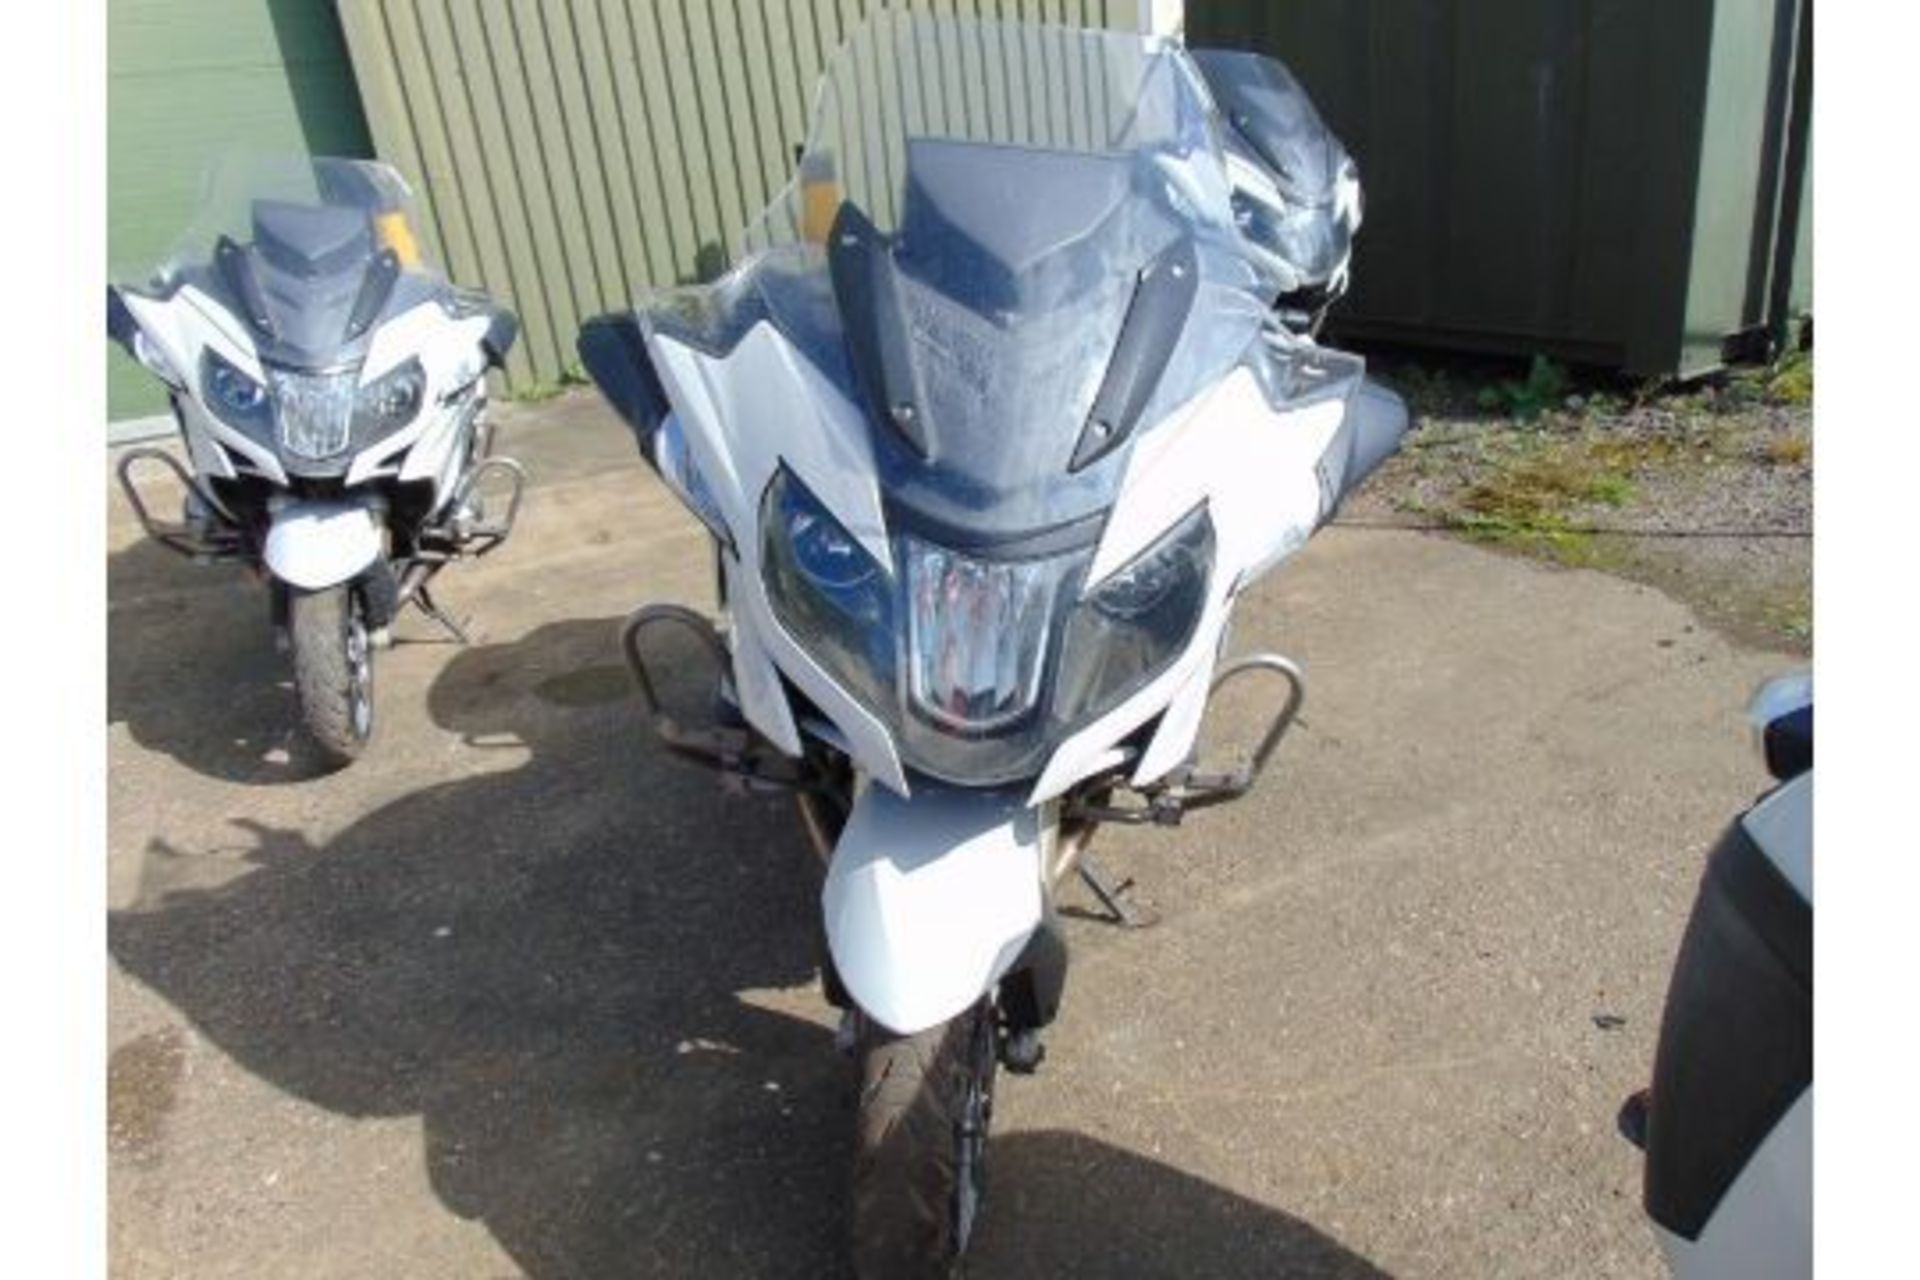 2015 BMW R1200RT Motorbike - Recent release from UK Police - Image 2 of 19